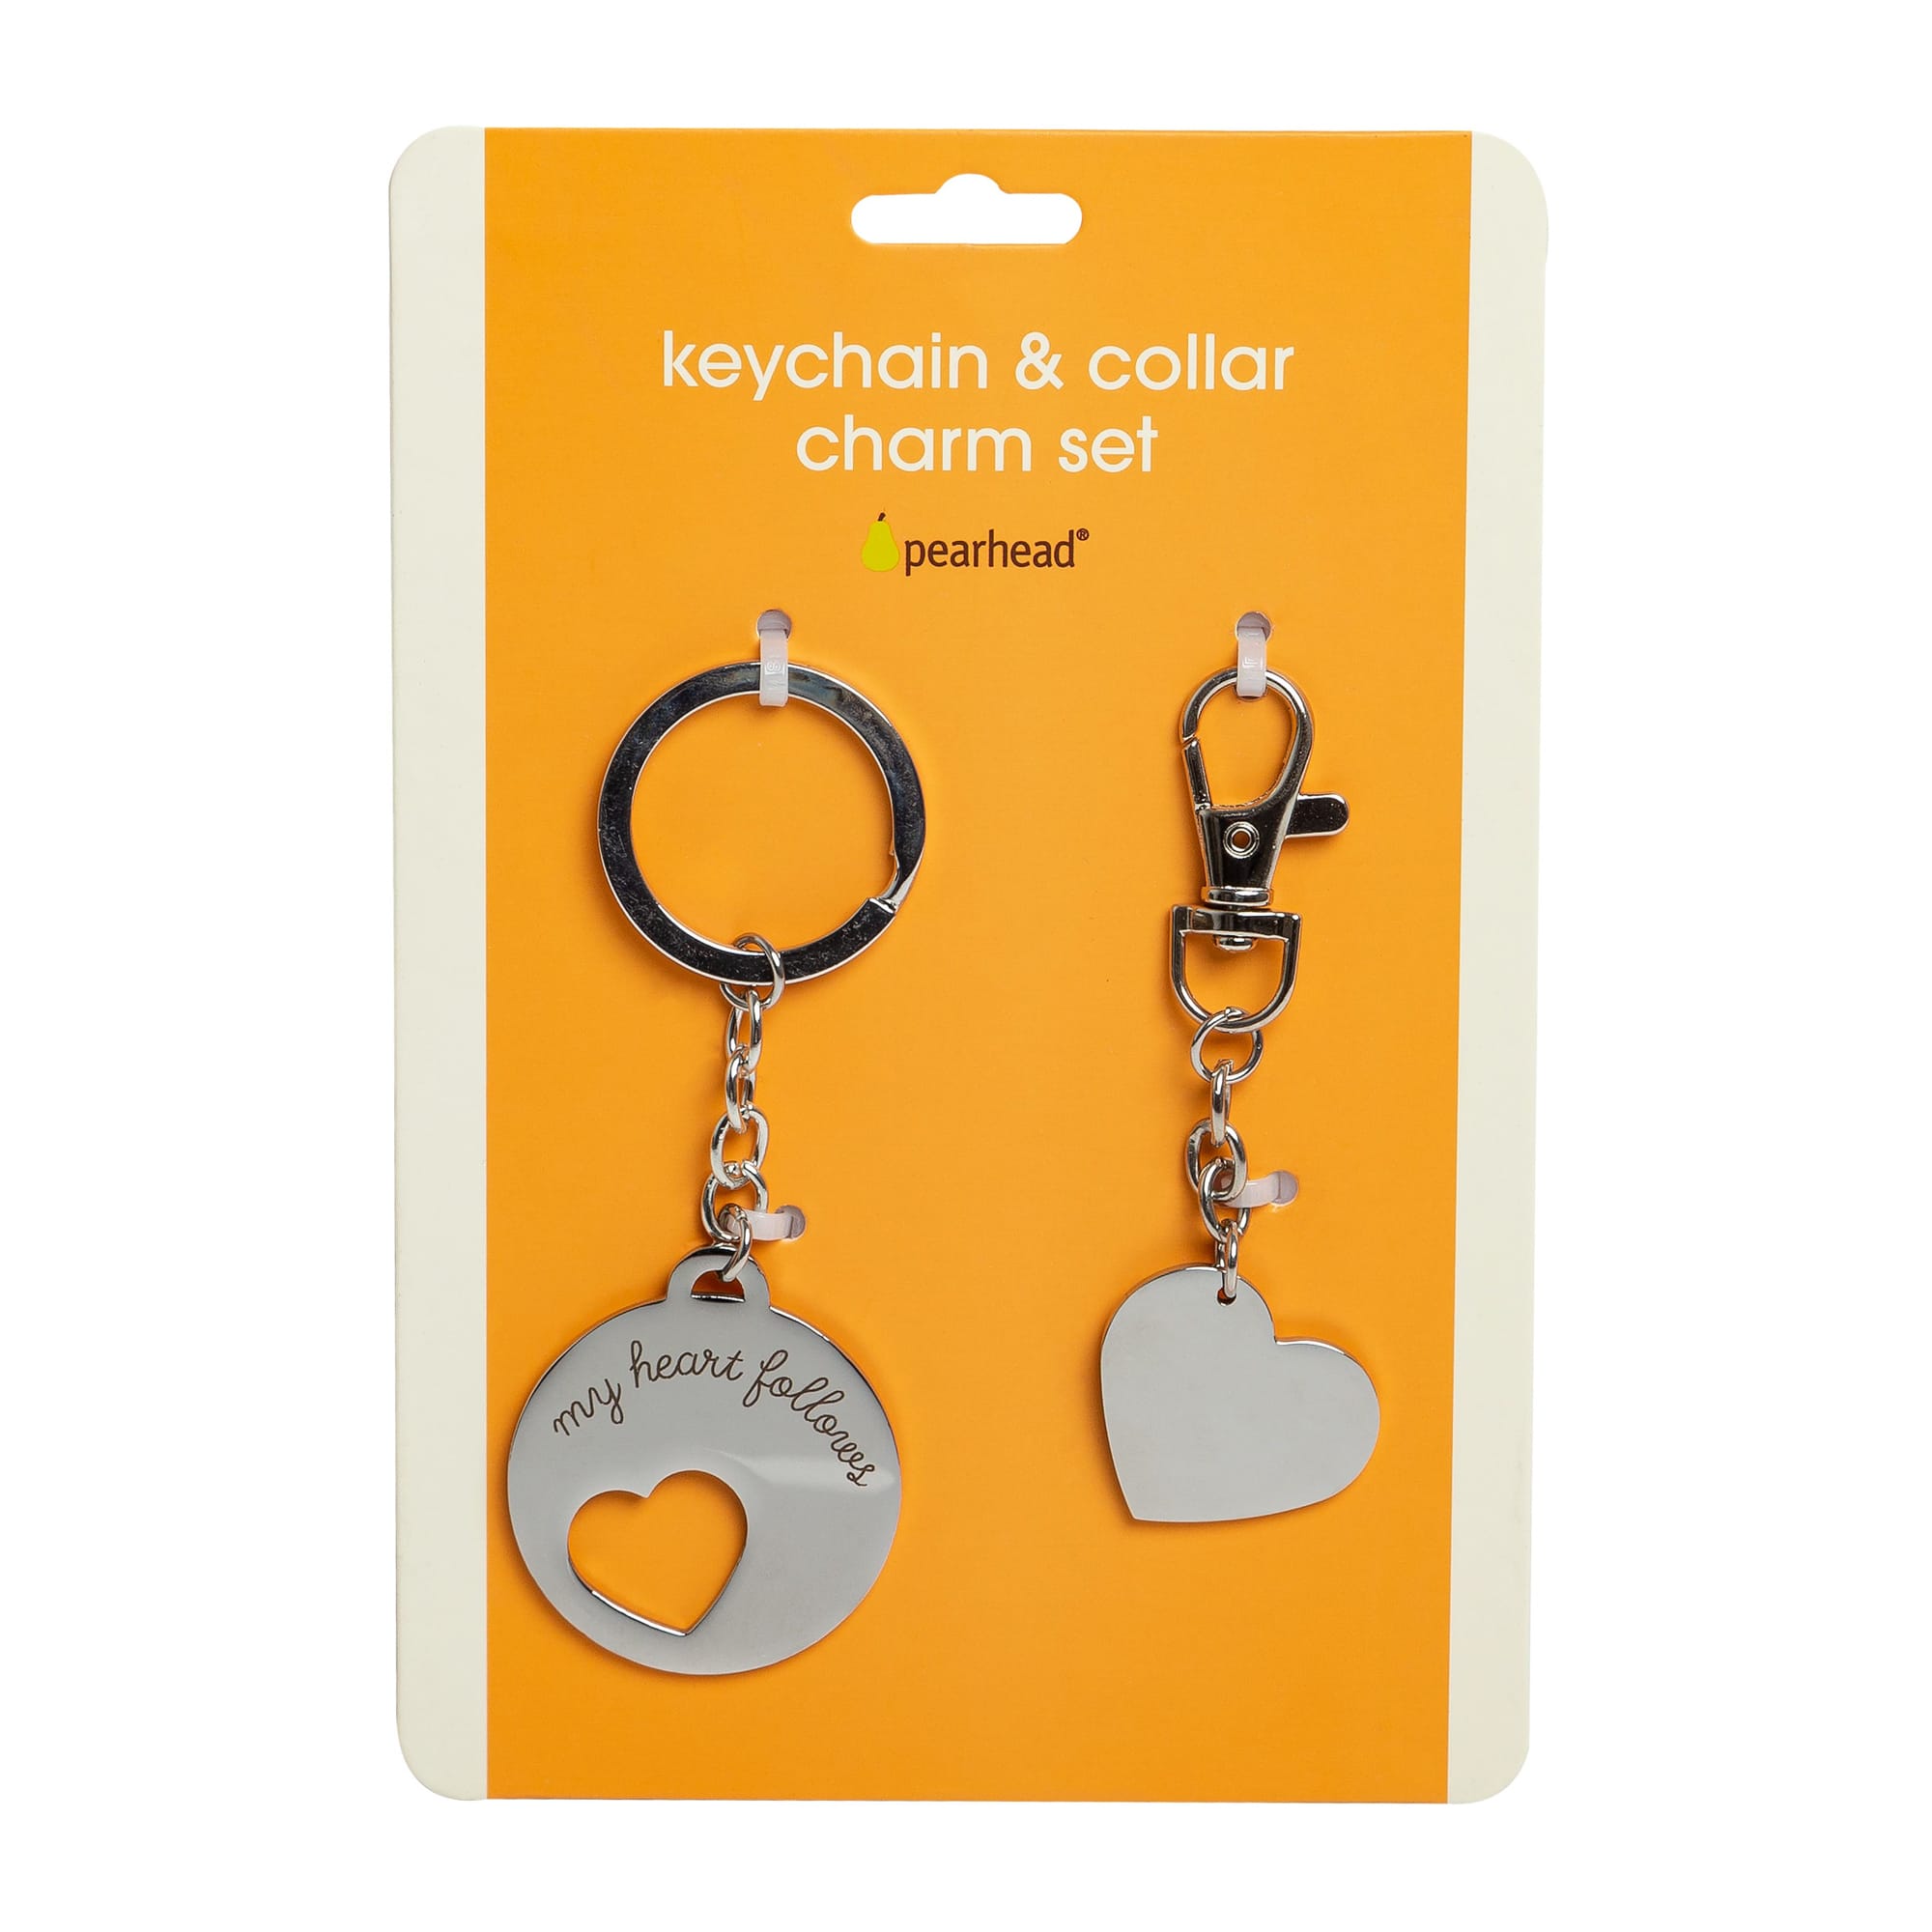 Shop Lv Dog Keychain with great discounts and prices online - Oct